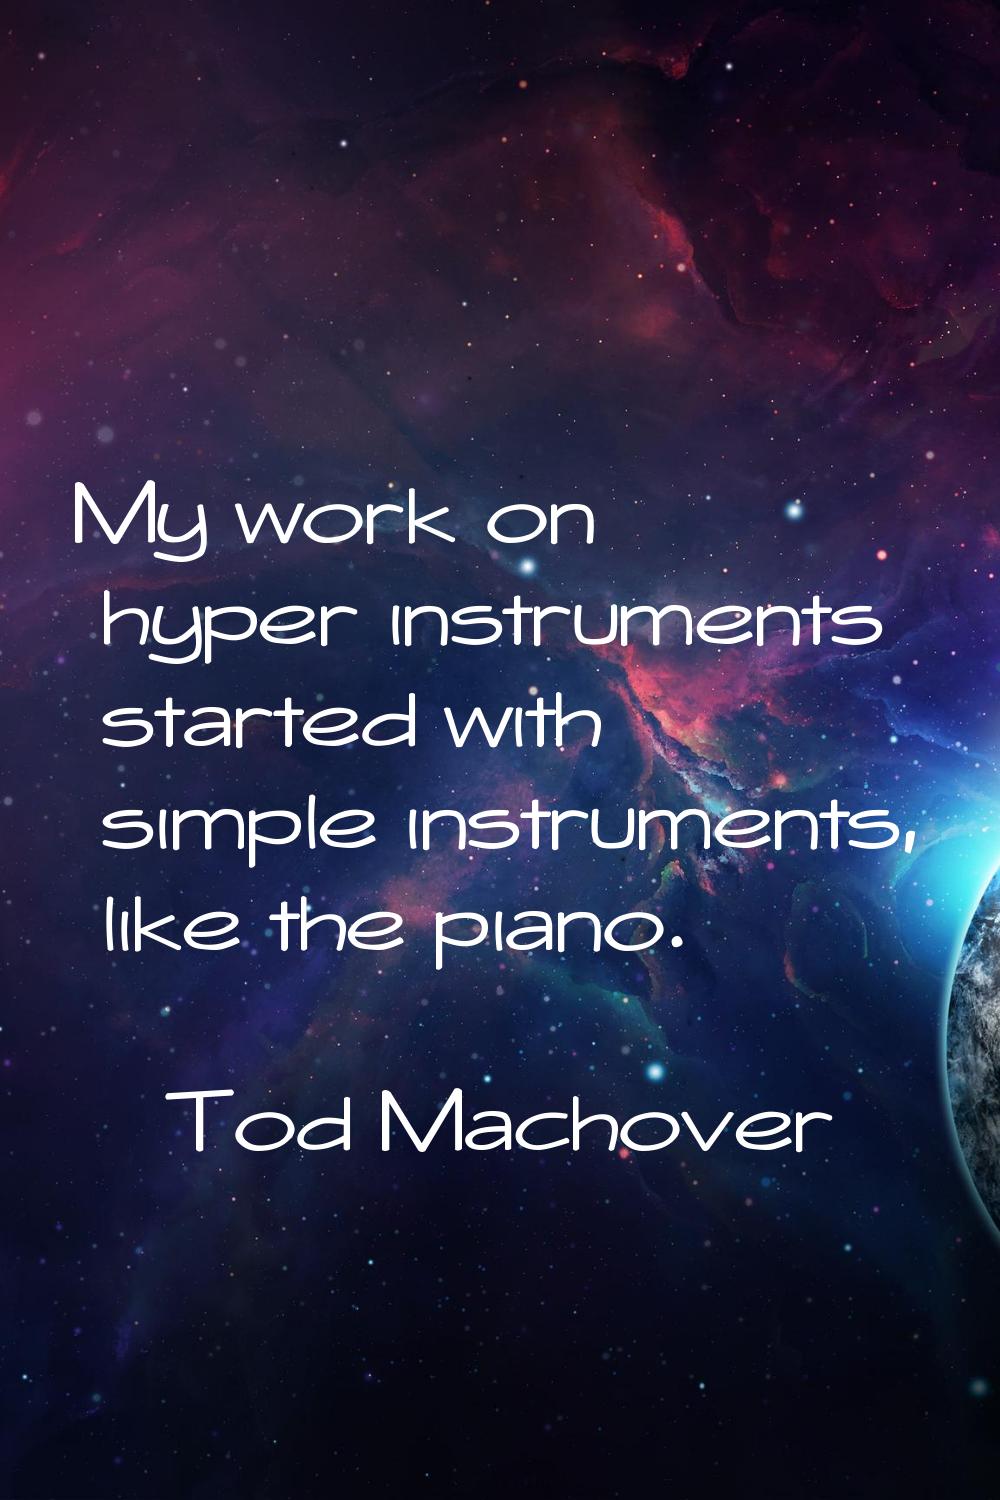 My work on hyper instruments started with simple instruments, like the piano.